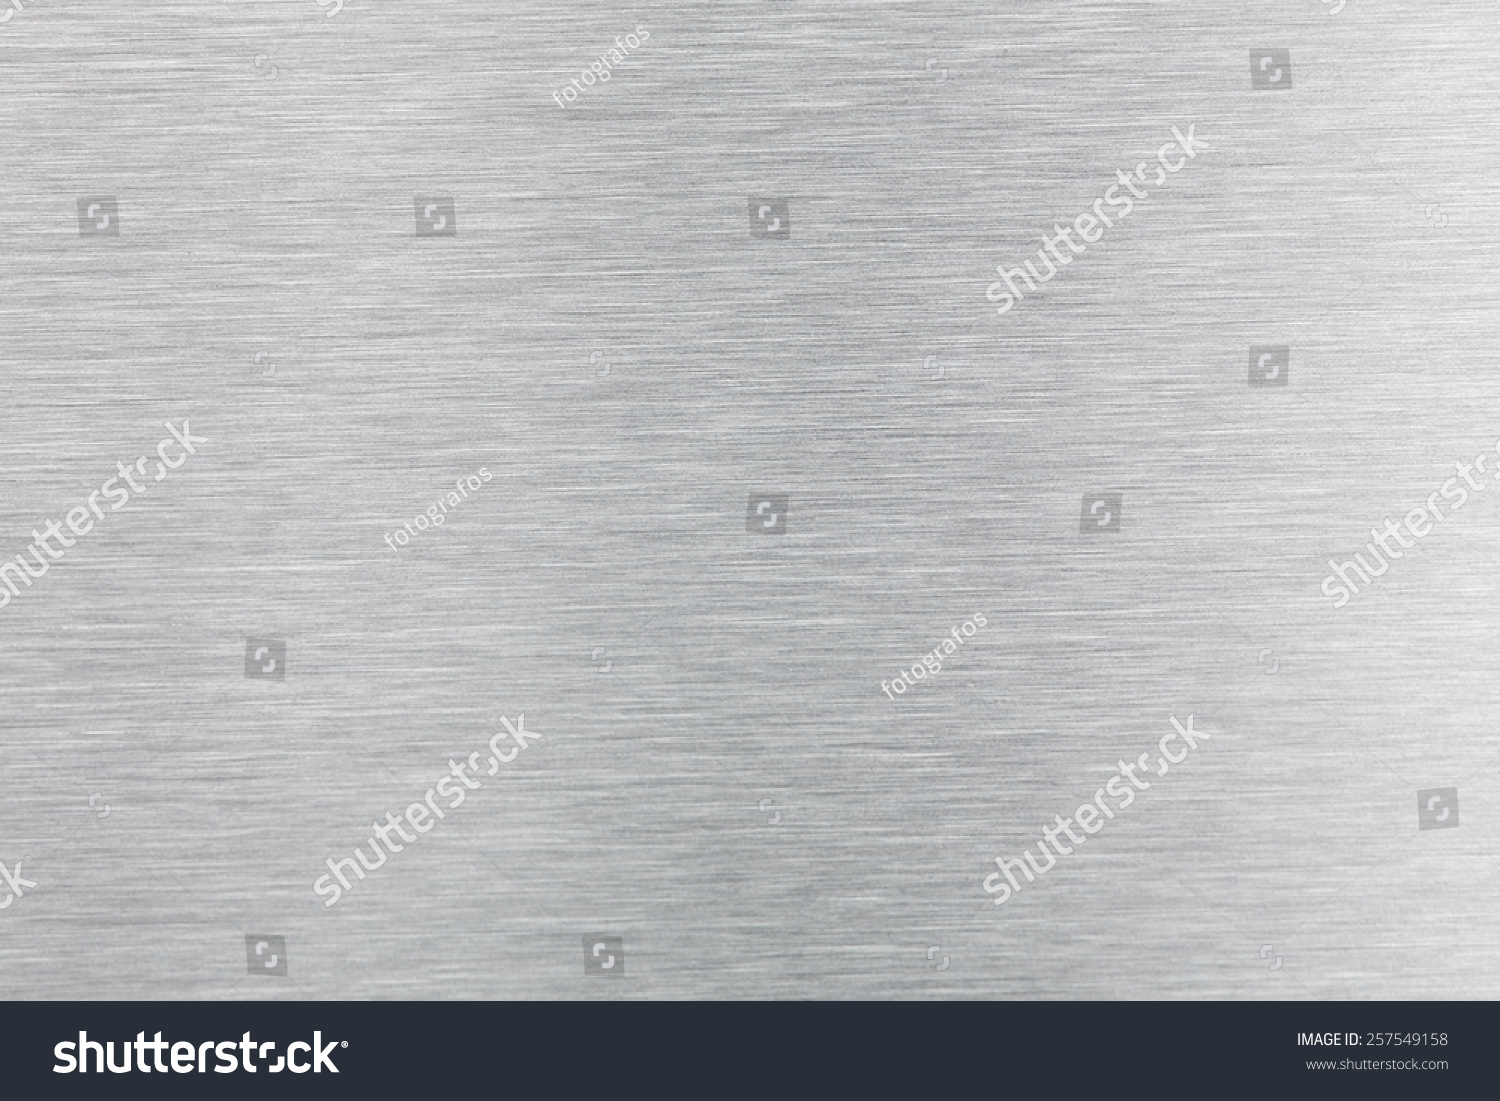 Stainless steel texture #257549158